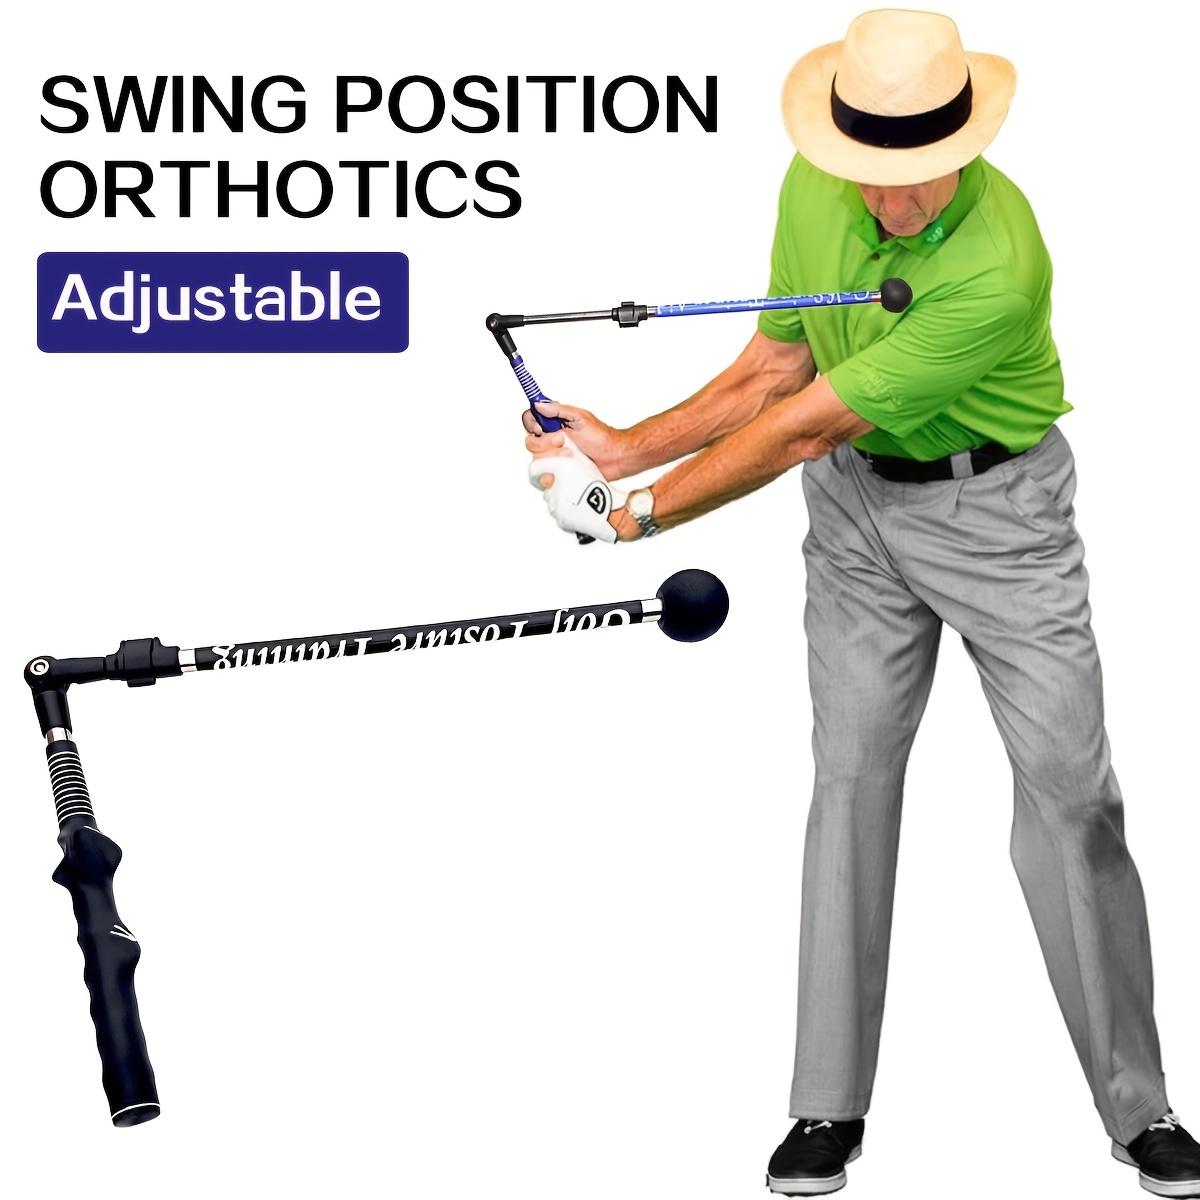 Improve Your Golf Swing with This Lightweight, Durable Trainer - Increase  Shoulder Turn, Strength, Flexibility & Power!